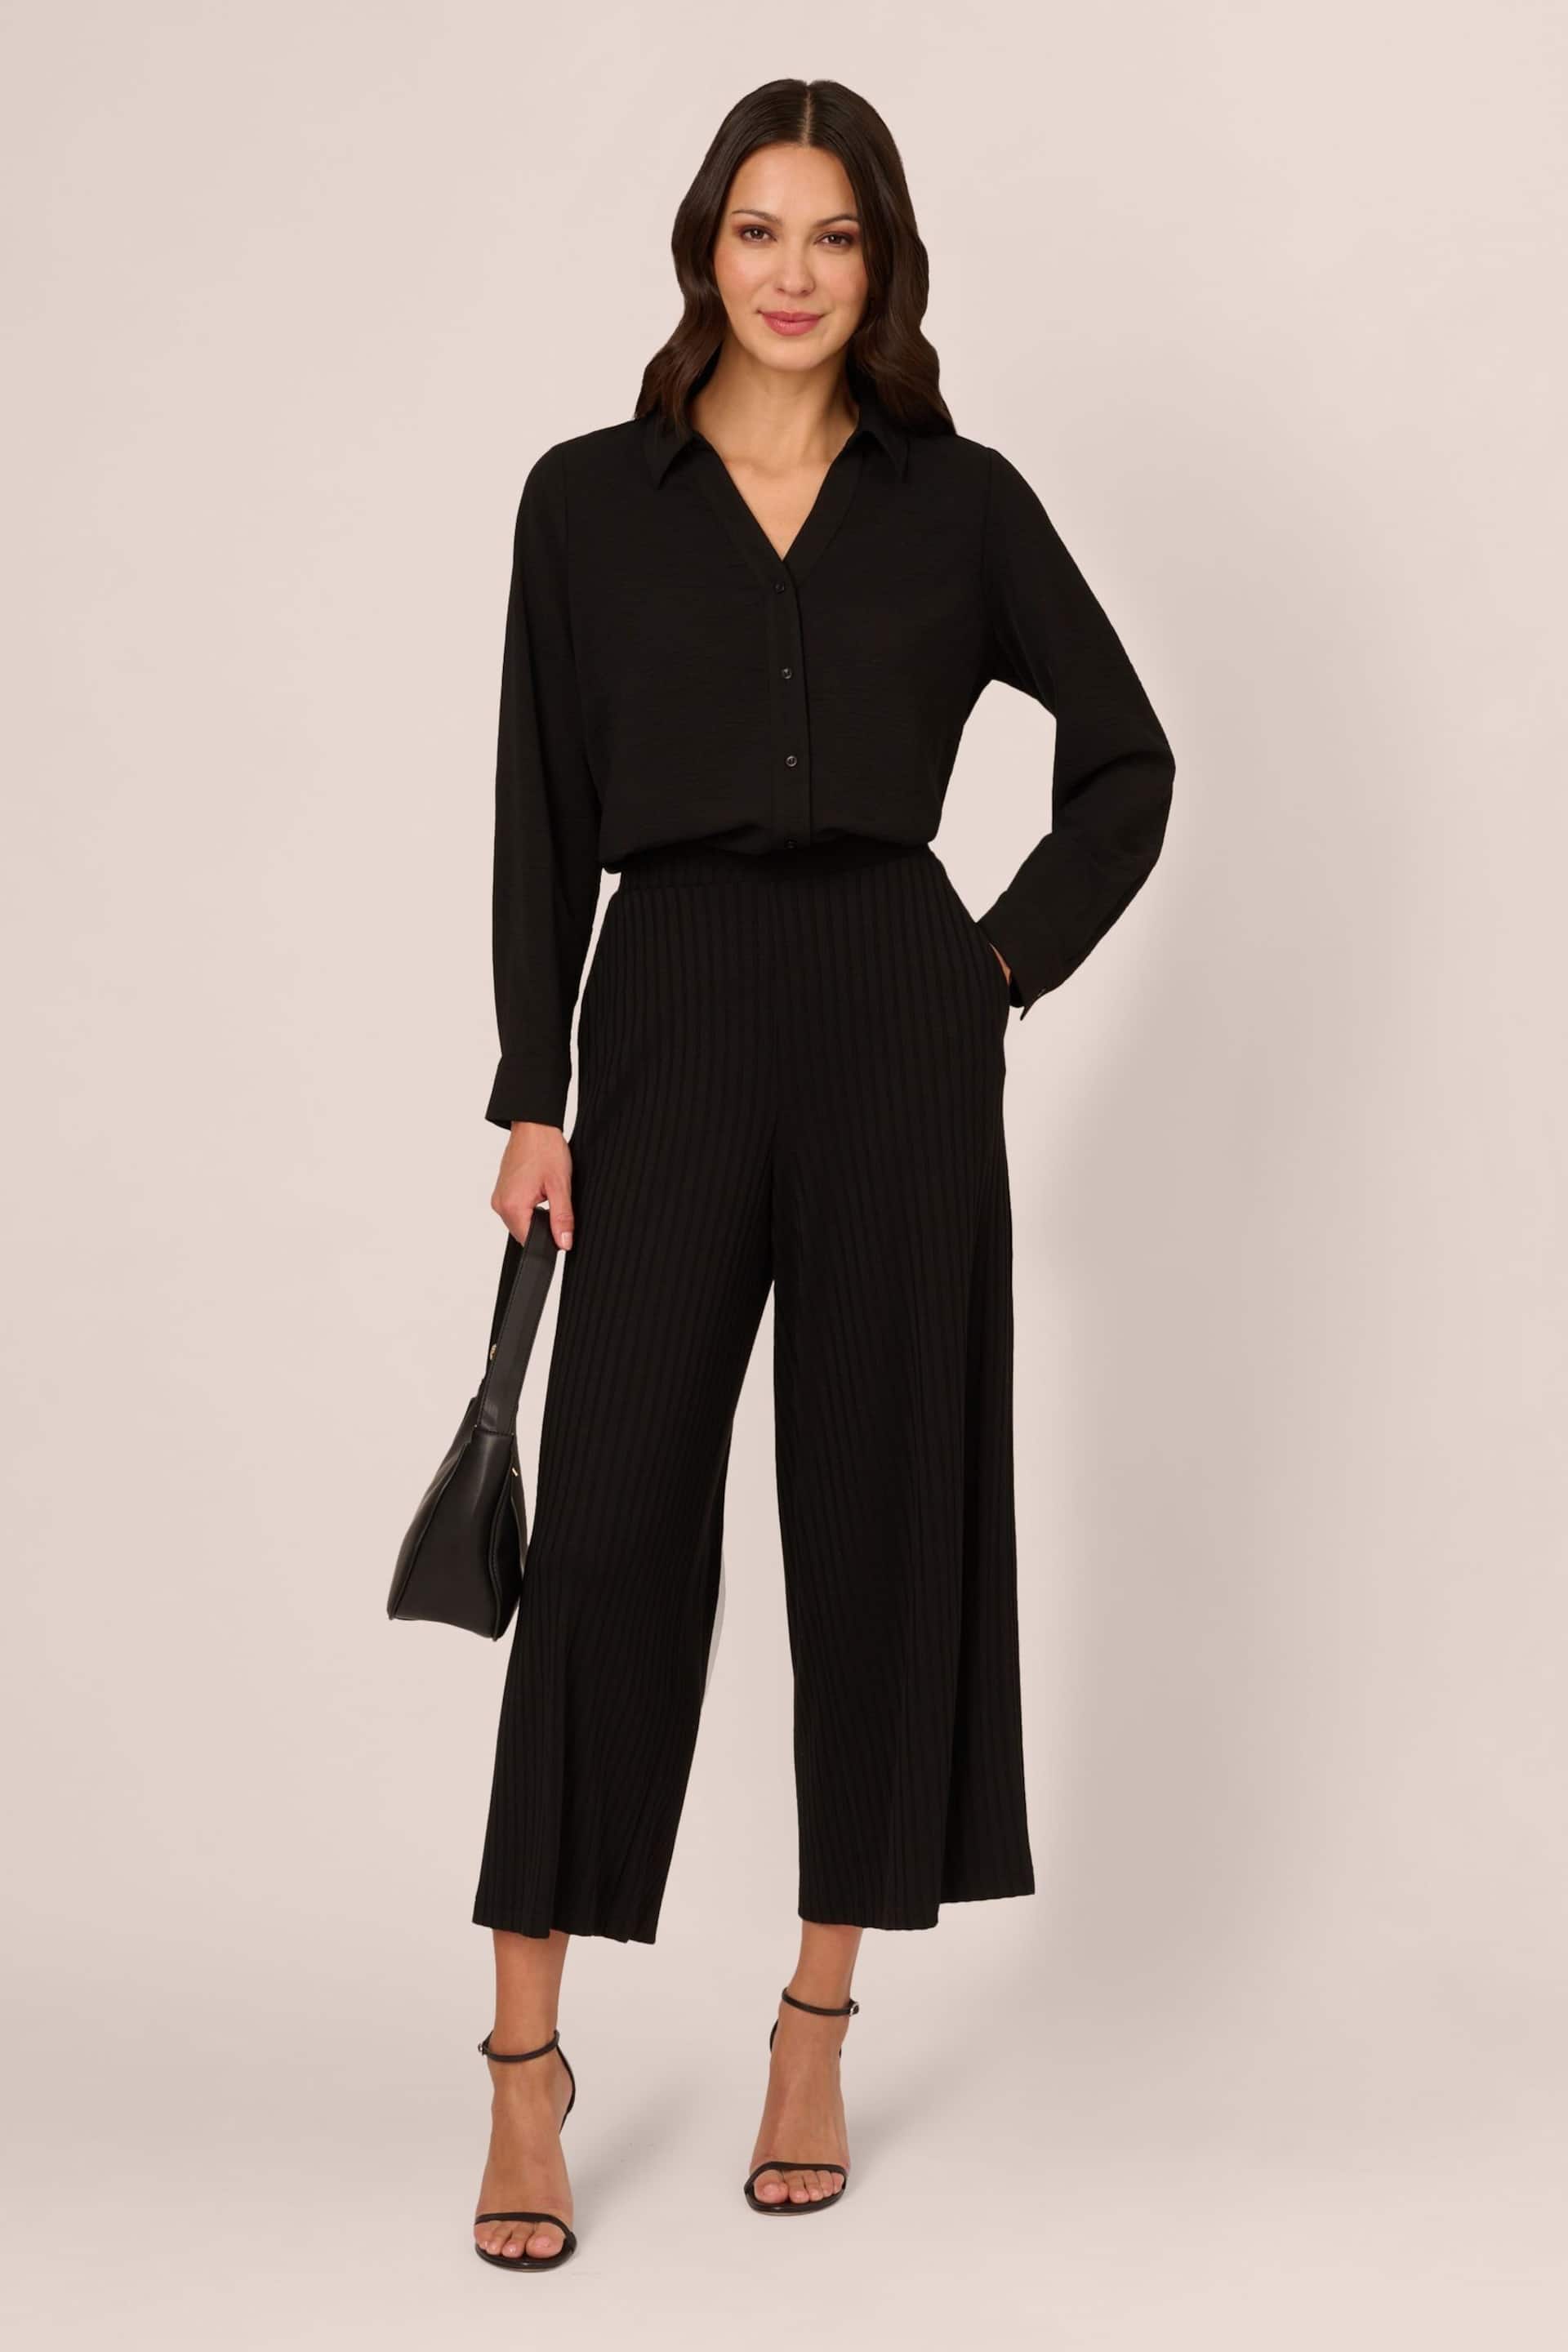 Adrianna Papell Solid Texture Airflow Woven Long Sleeve V-Collar Black Shirt - Image 5 of 6